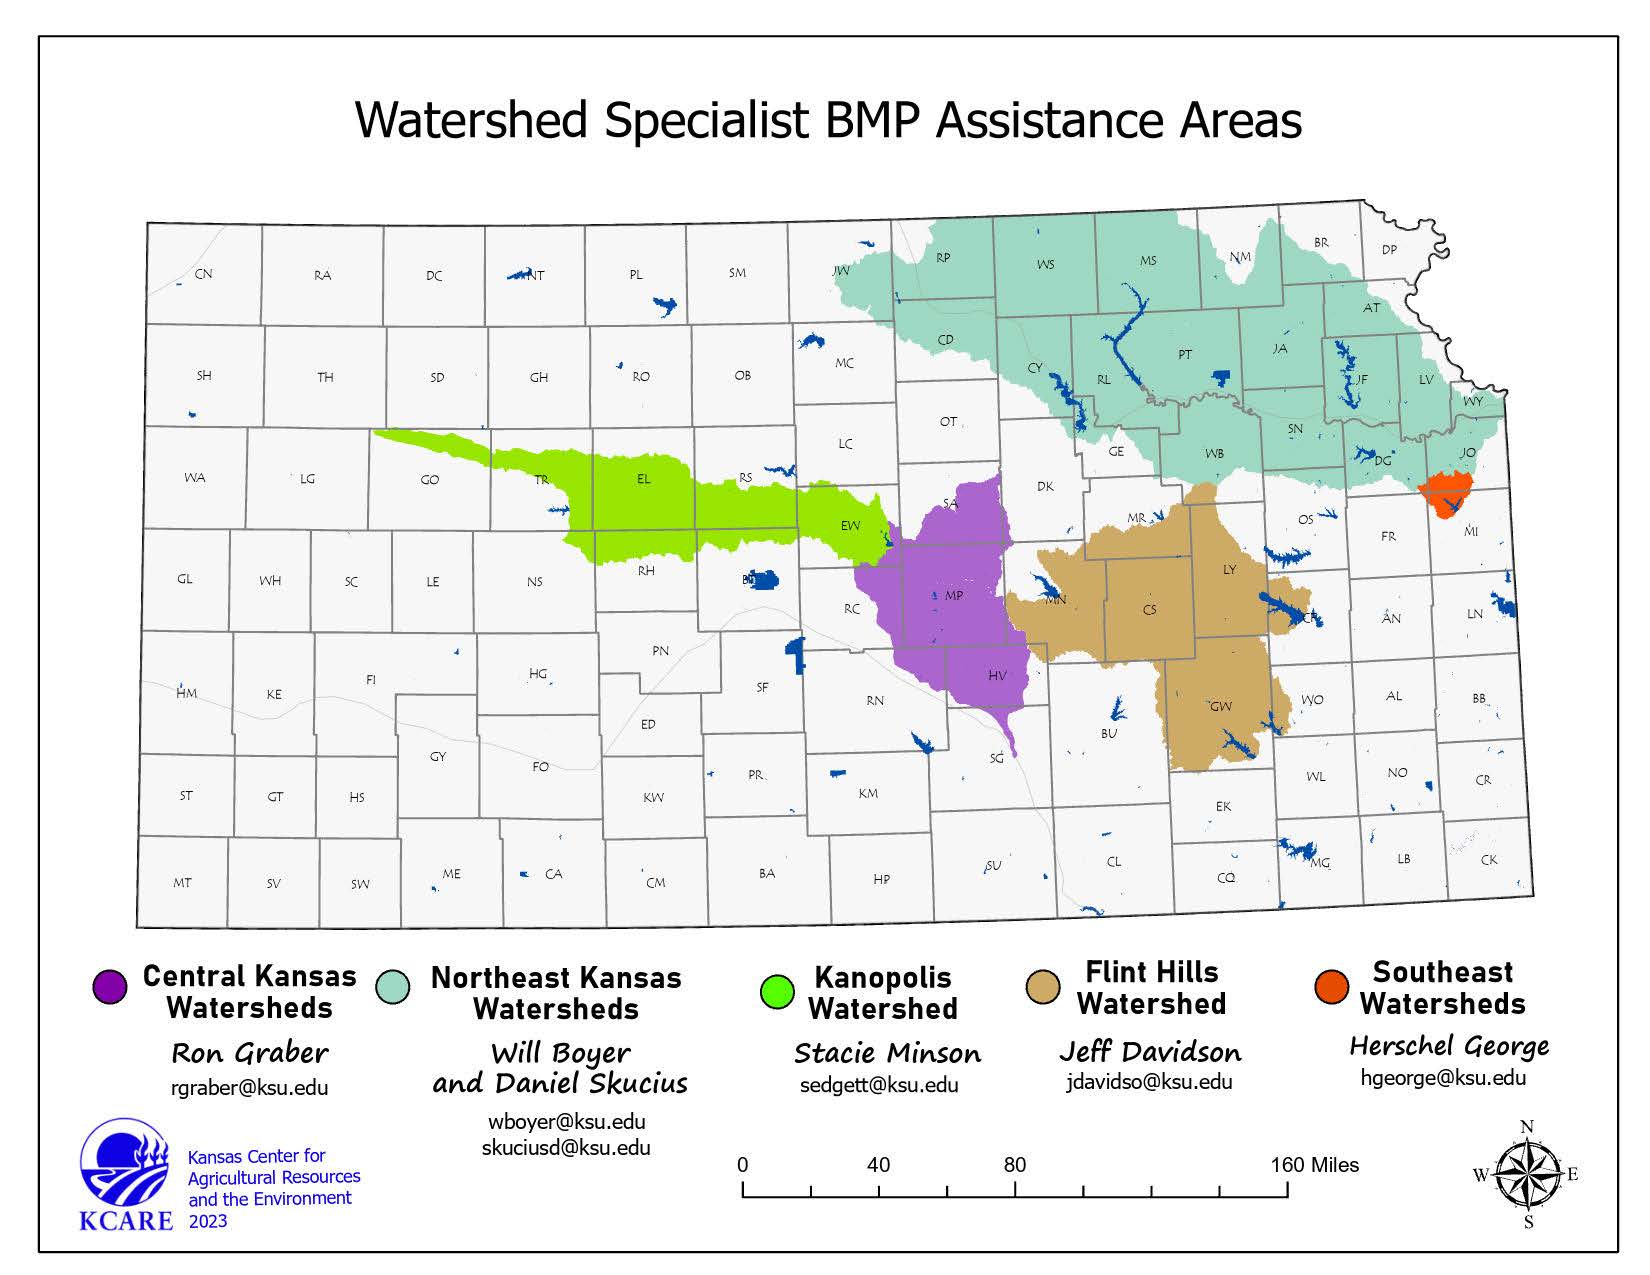 Map showing watershed specialist referral areas across Kansas